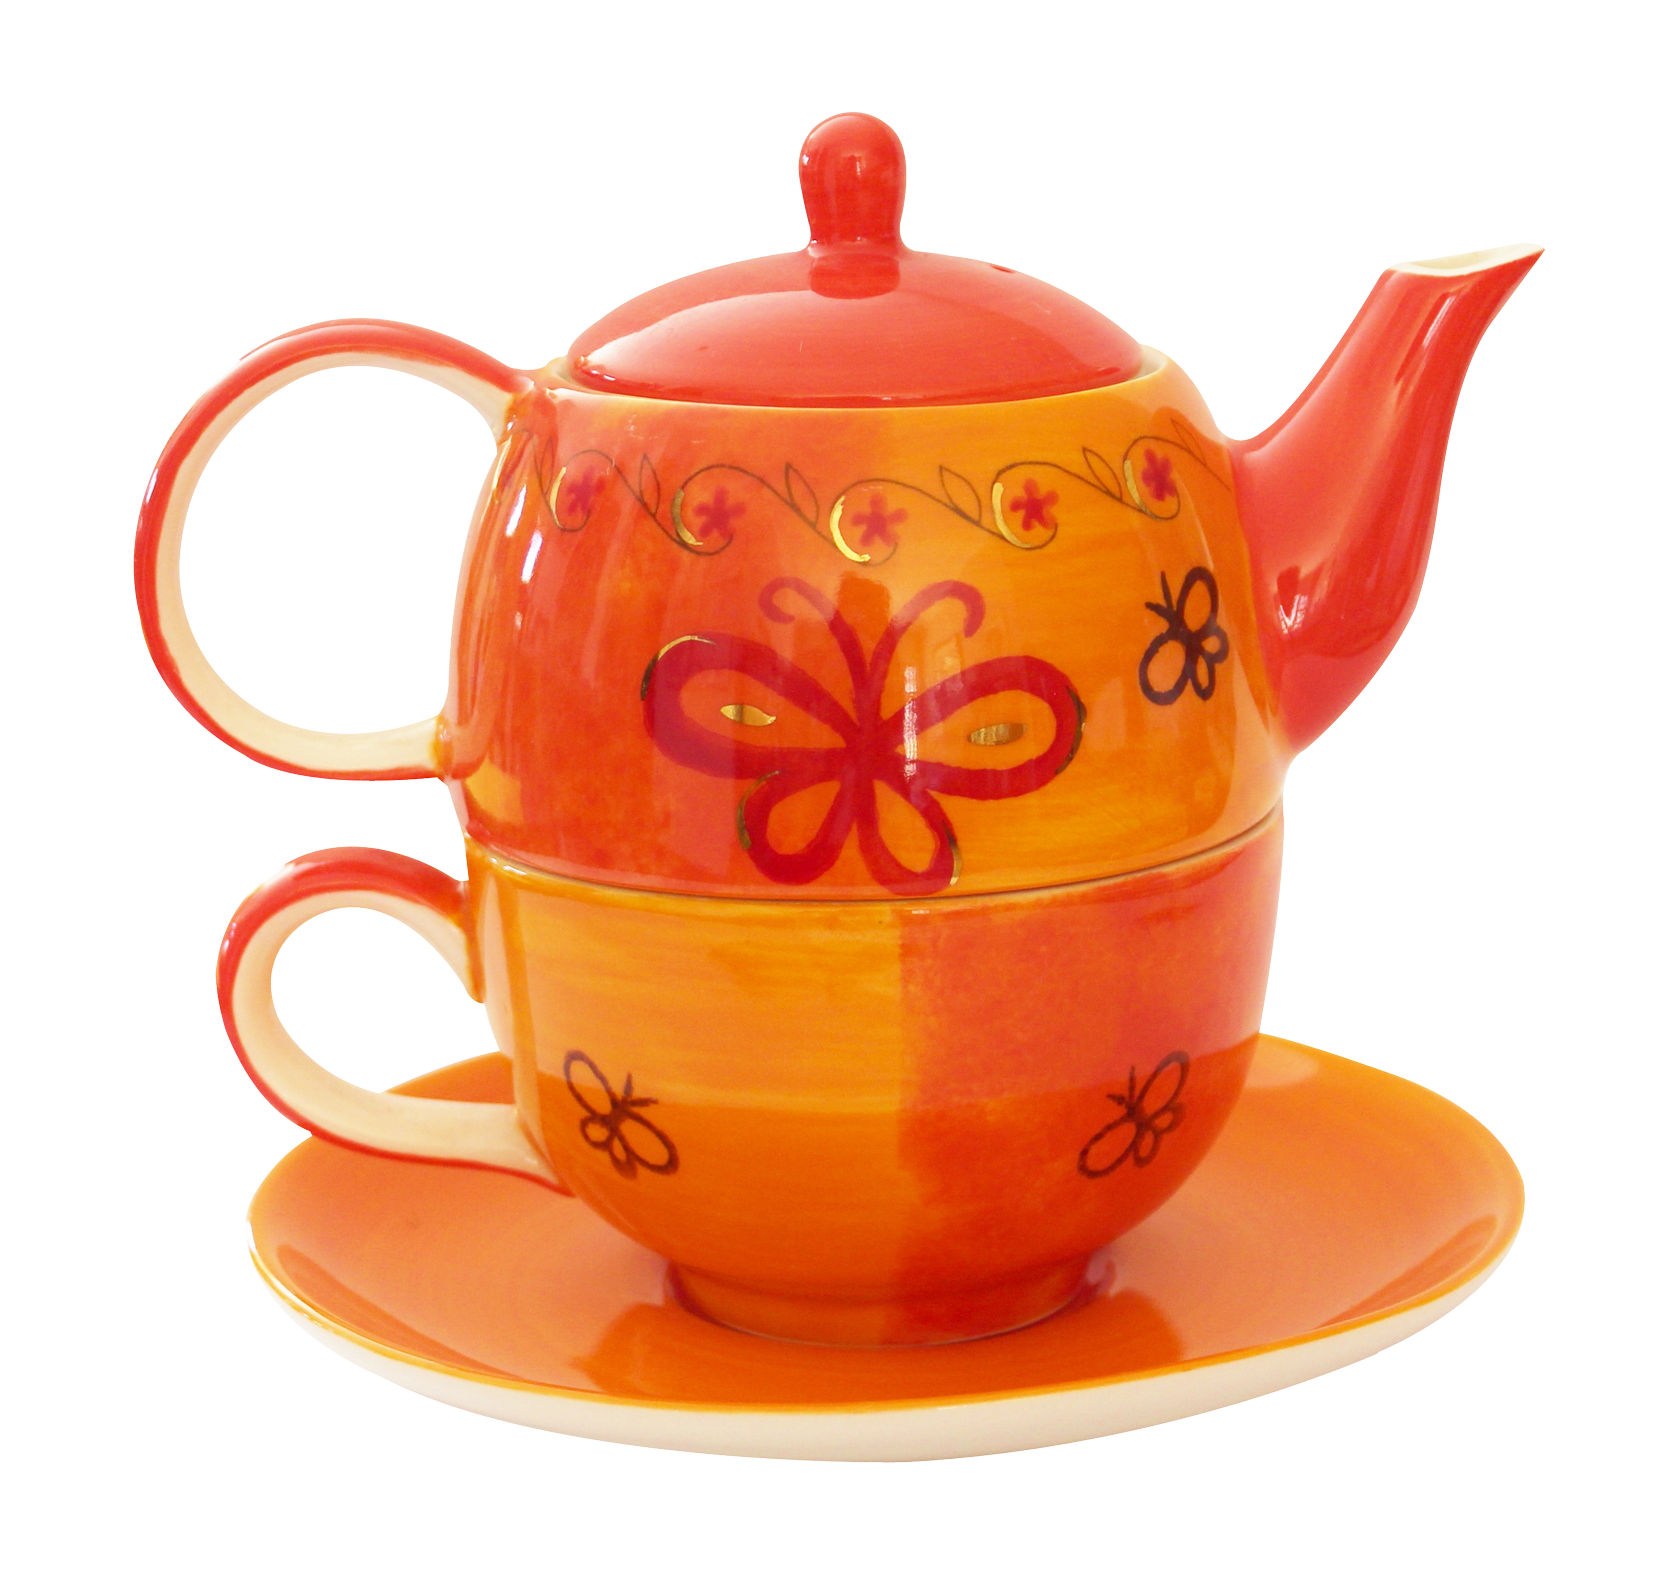 A Teapot And Saucer With A Butterfly Design